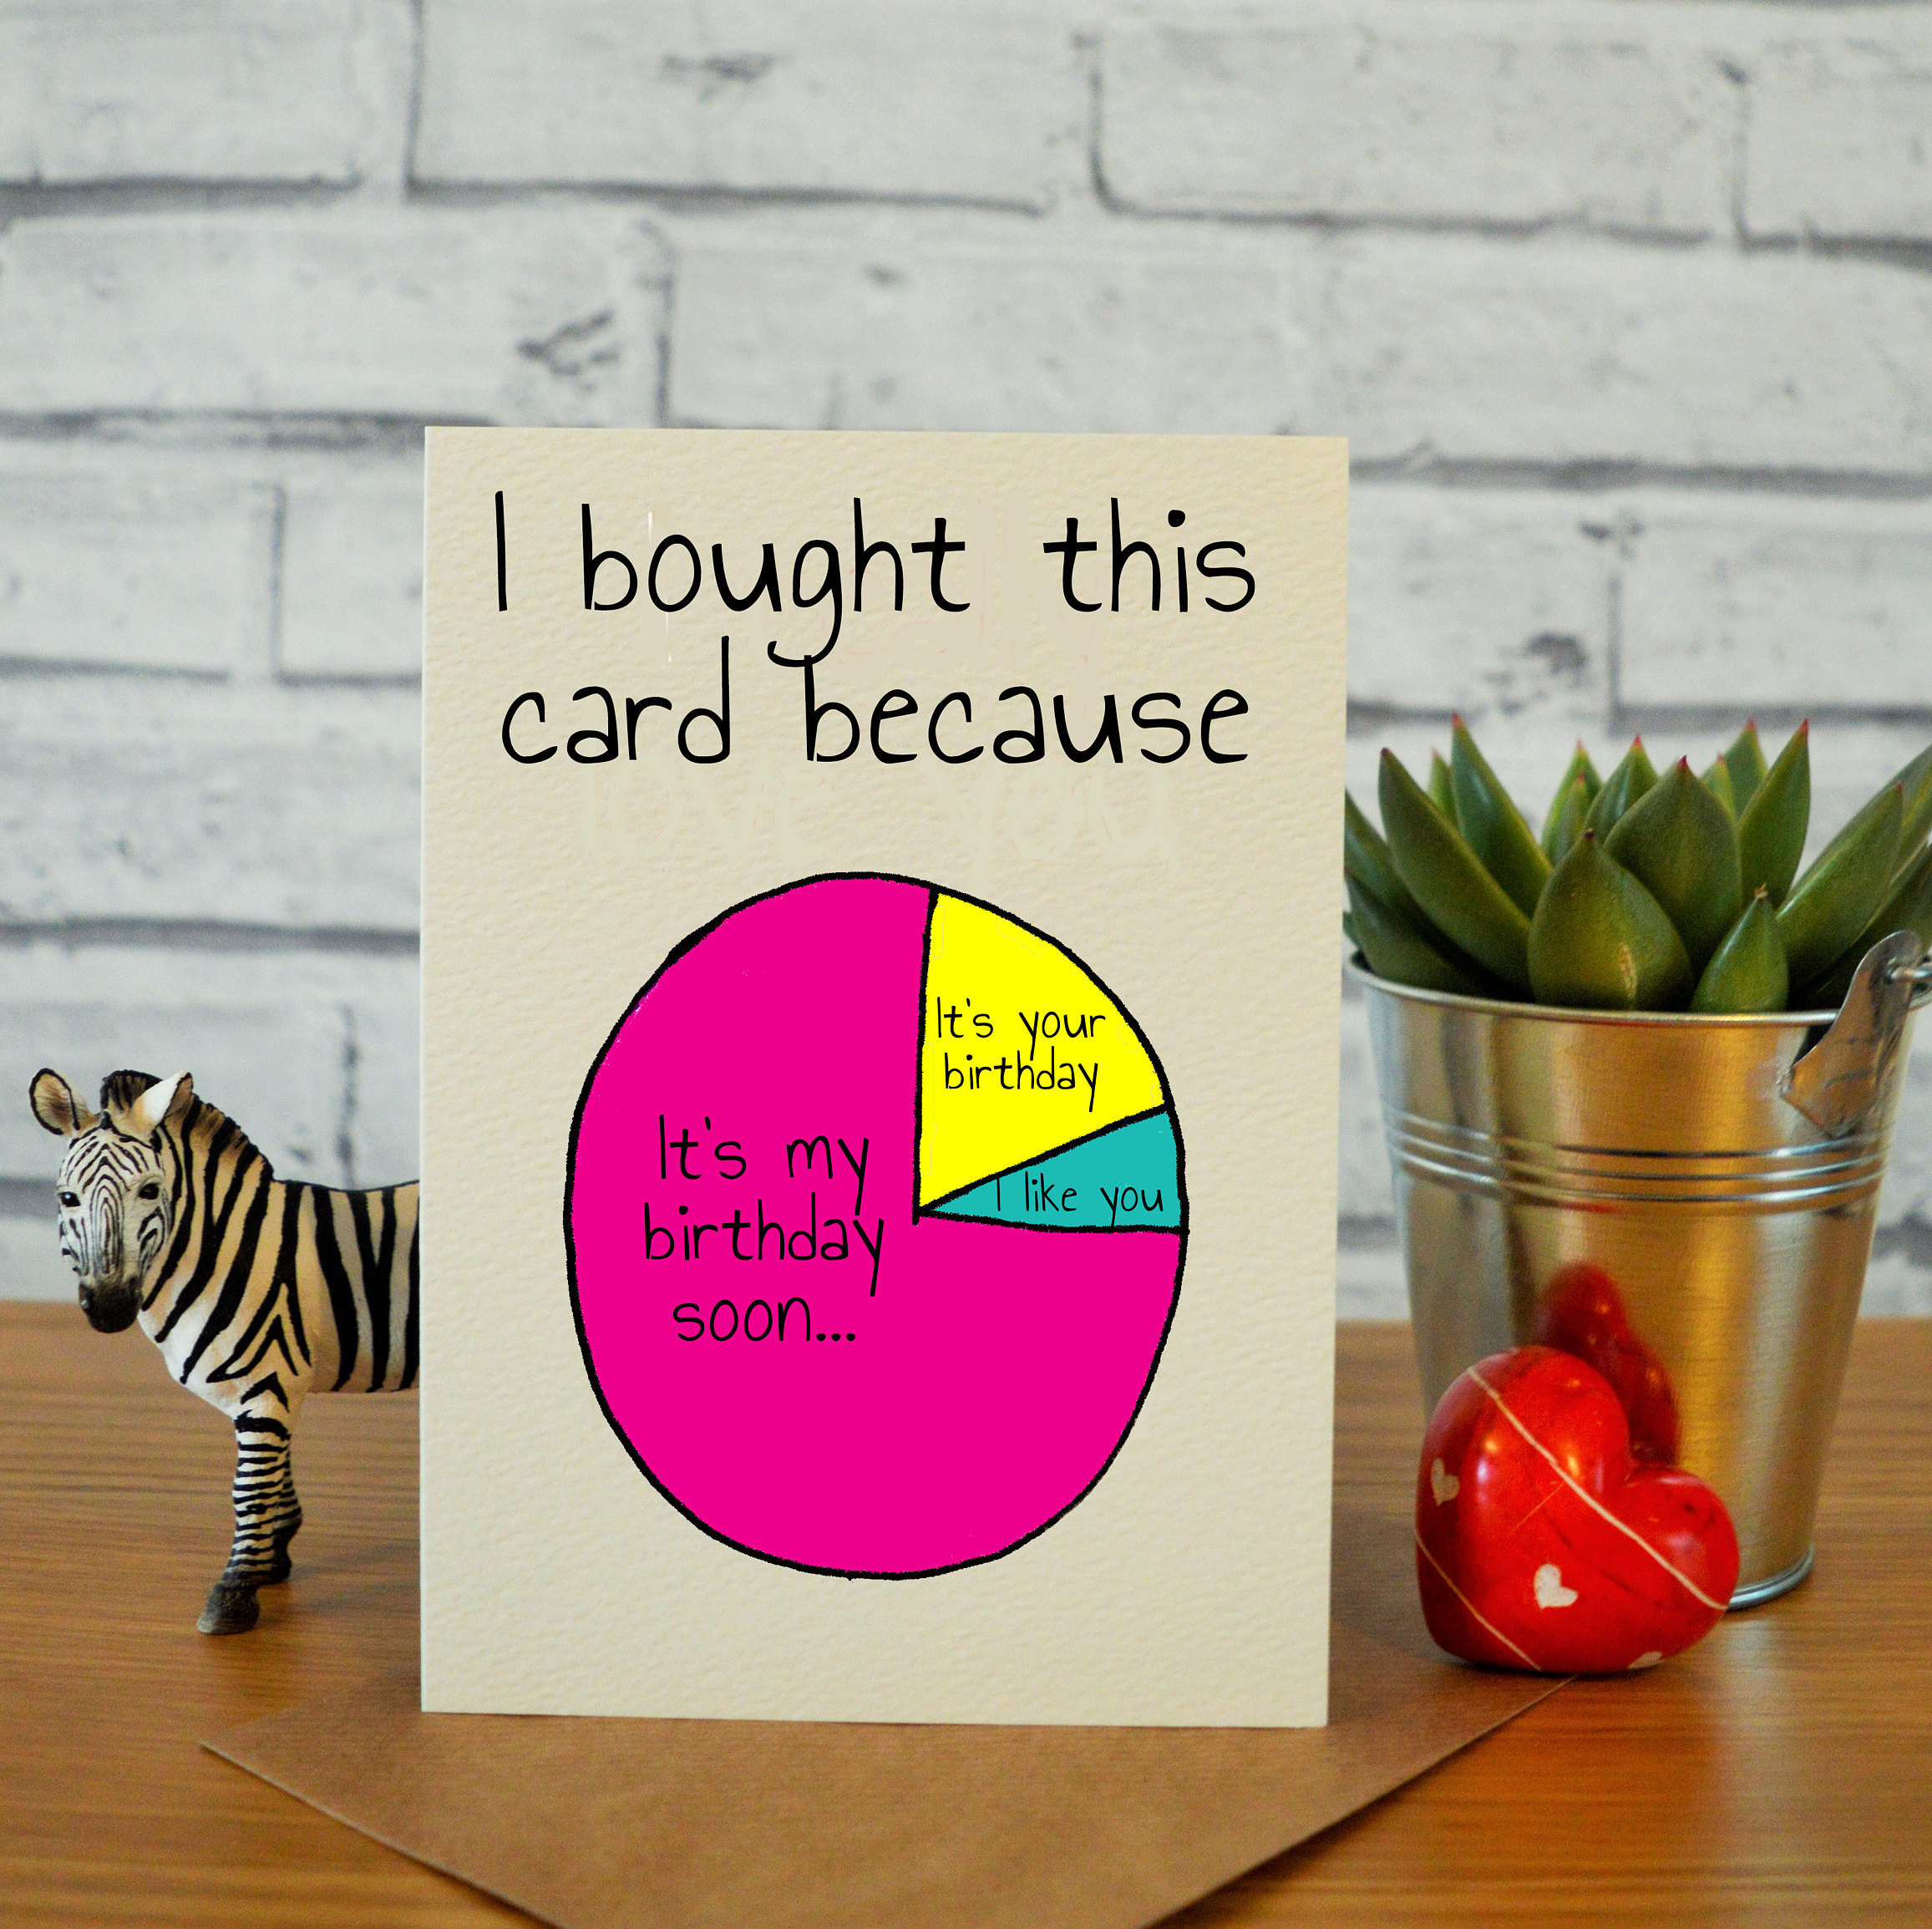 Birthday Card Ideas For Best Friend Funny Best Friend Birthday Card Funny Birthday Cards Funny Birthday Card Best Friend Gifts Best Friend Card Funny Best Friend Birthday Cards